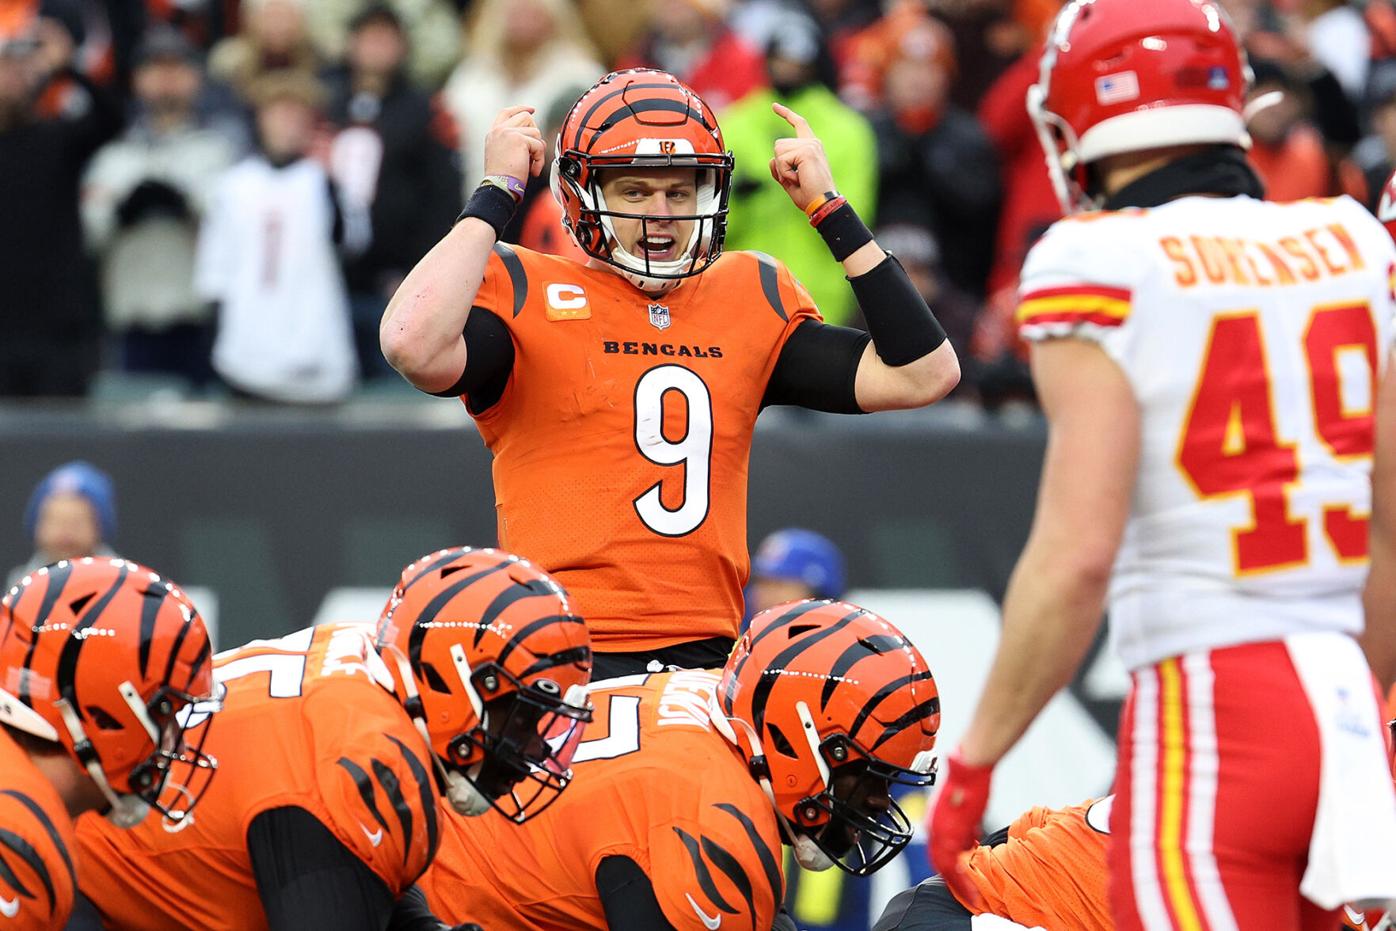 Chiefs unable to clinch AFC's top seed, fall 34-31 to Bengals